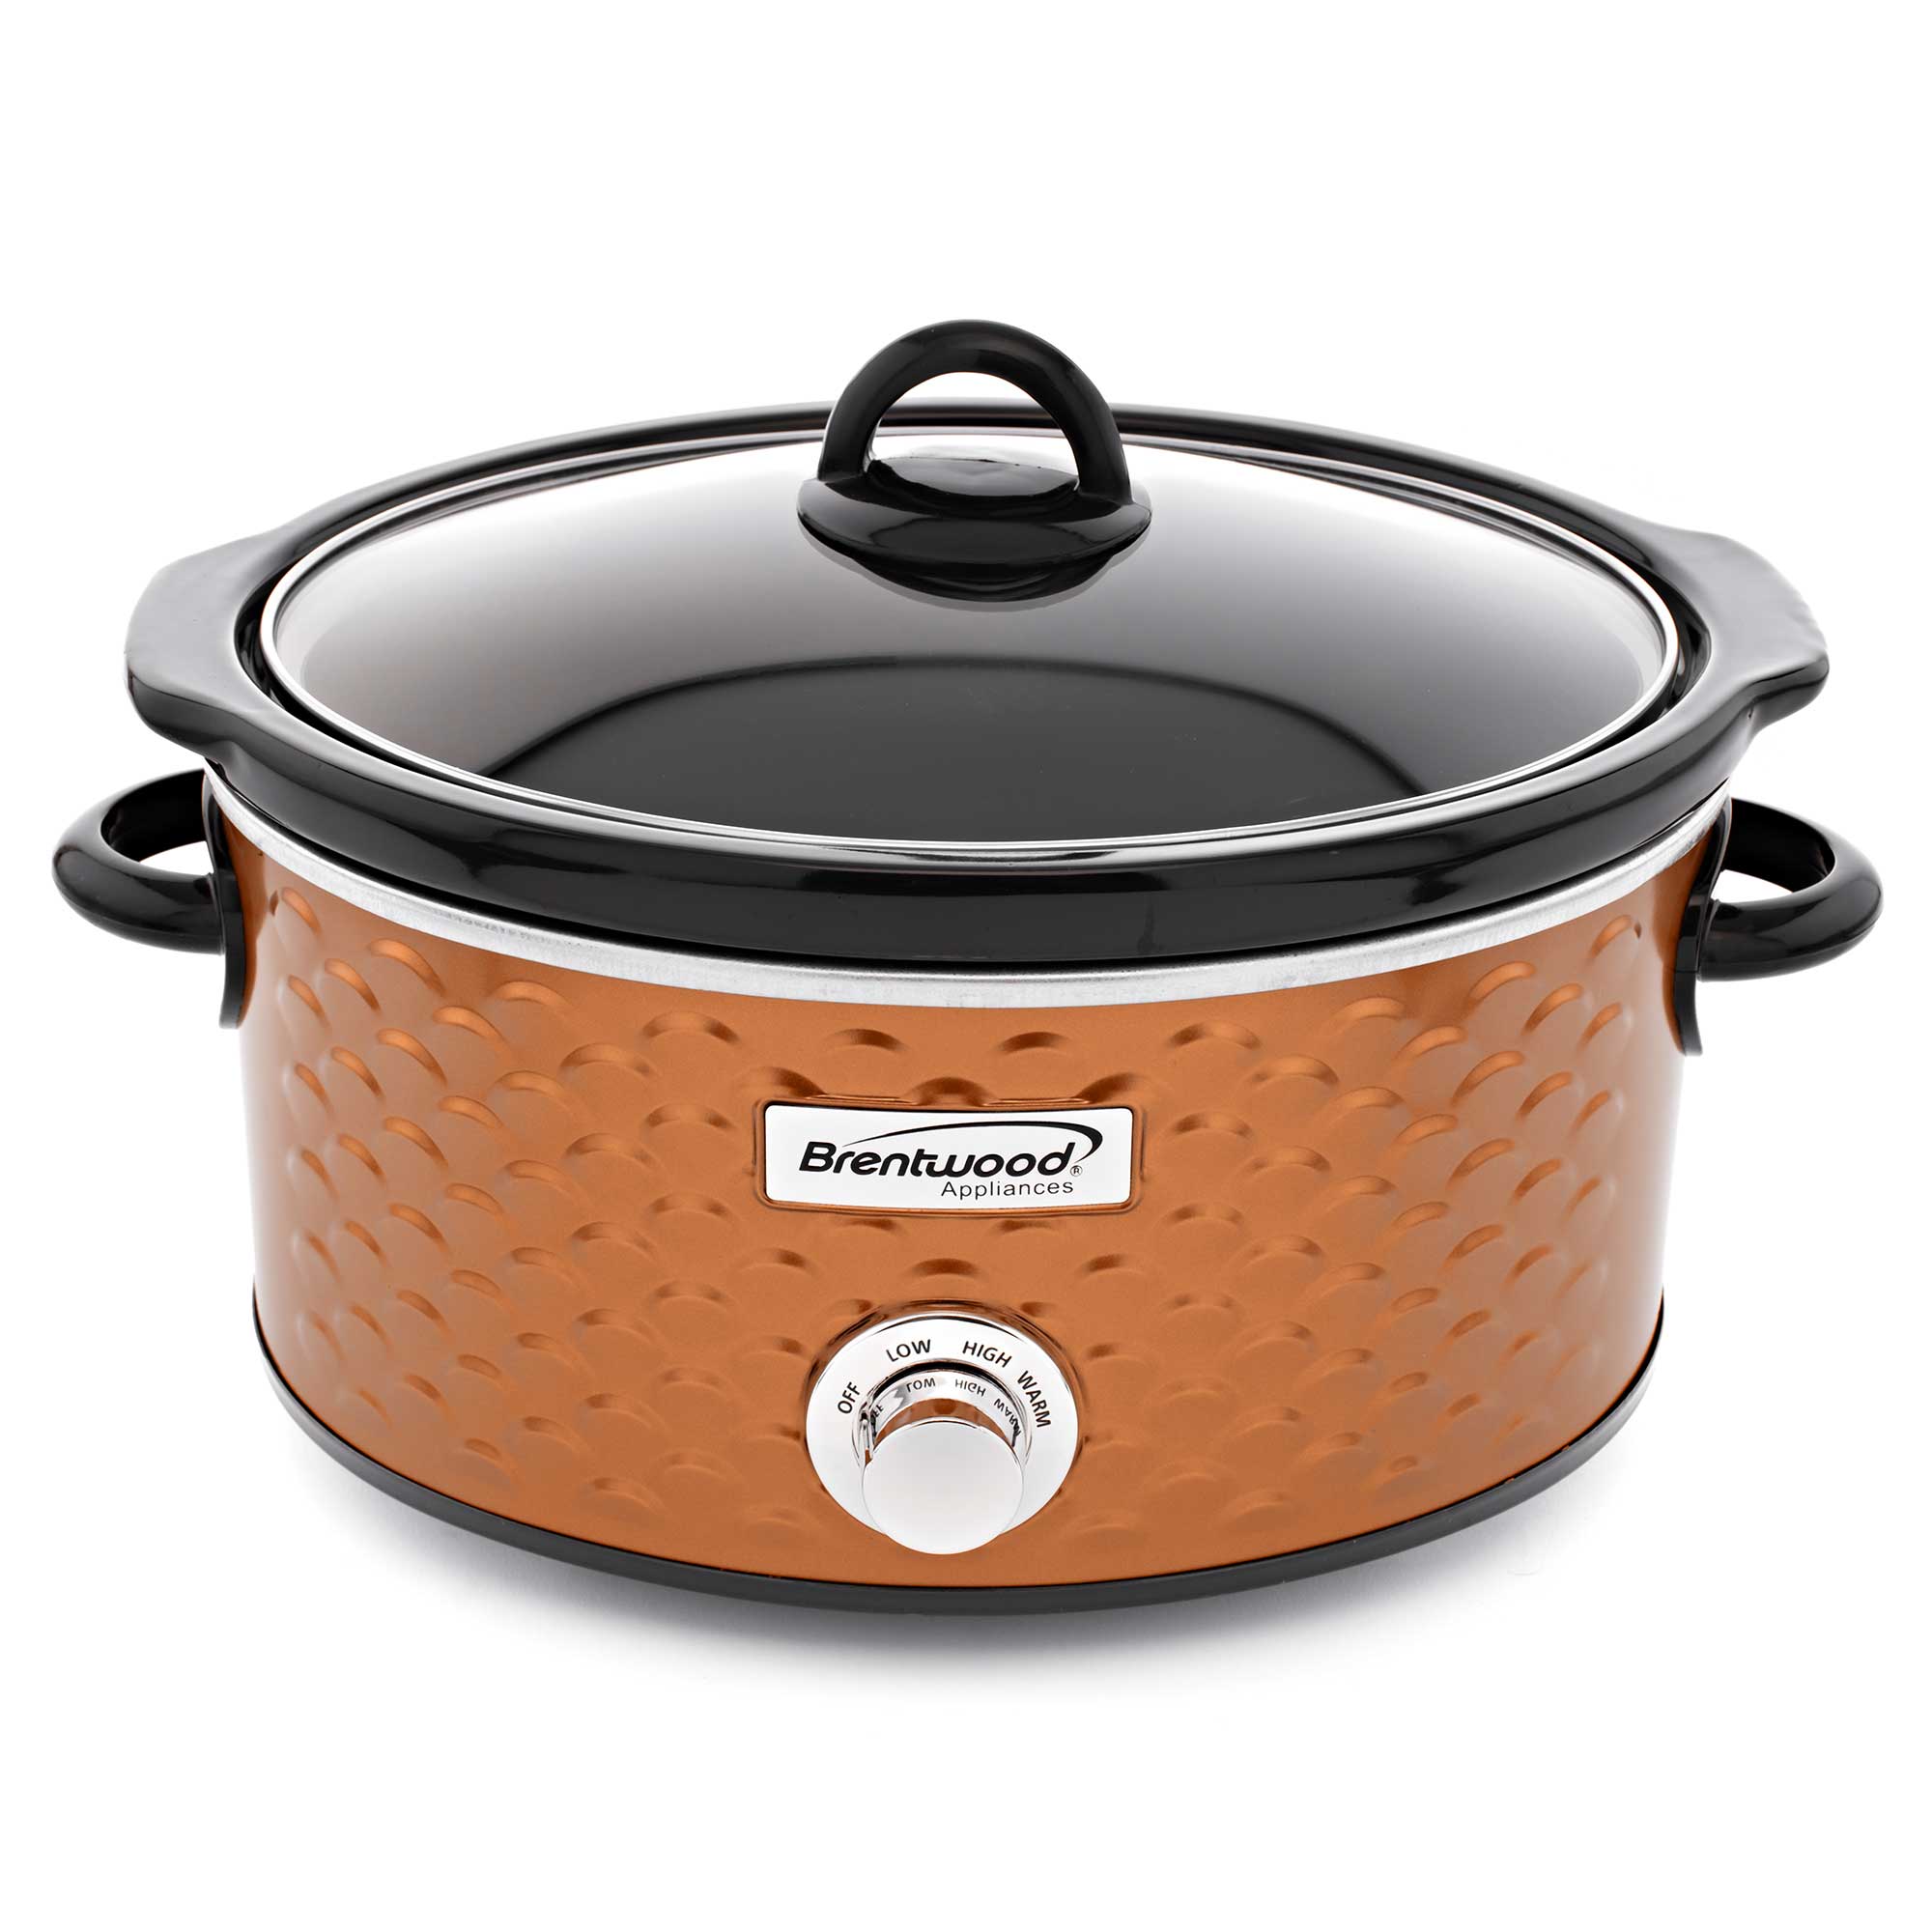 Brentwood SC-170S 8 quart Slow Cooker, Silver